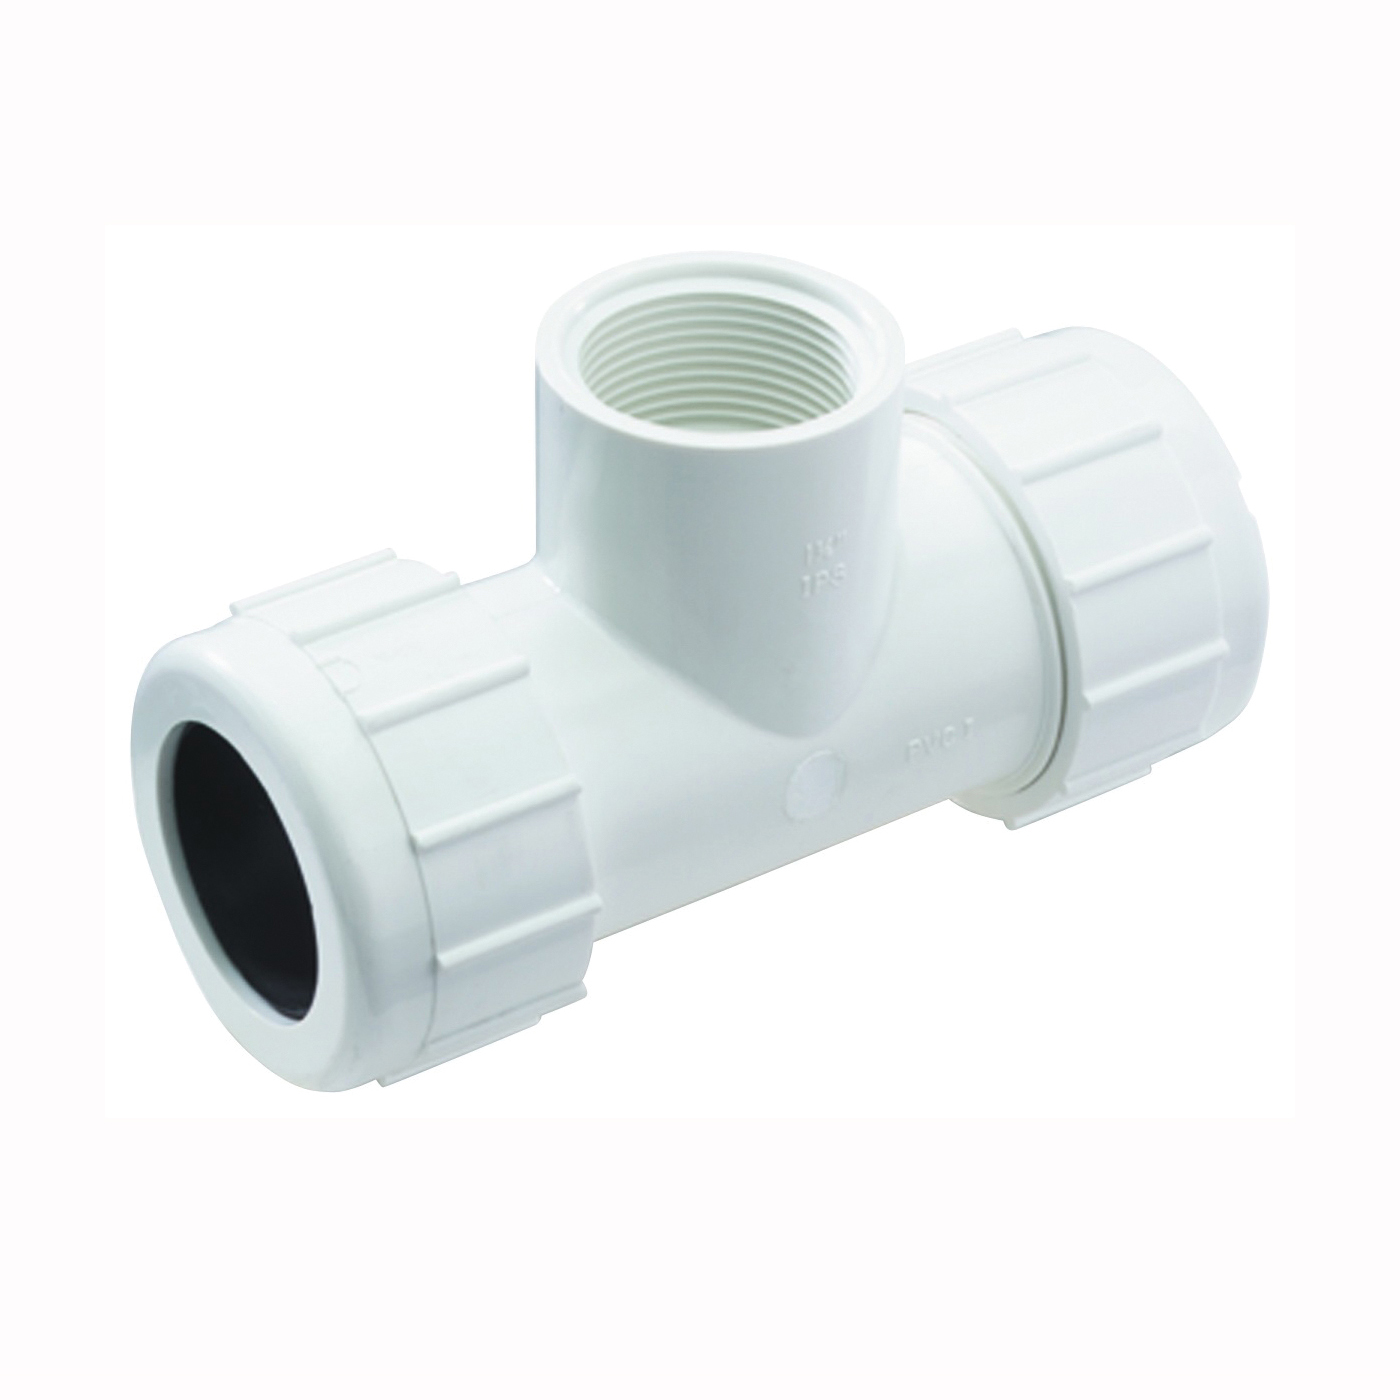 NDS CPT-0750-T Pipe Tee, 3/4 in, Compression x FNPT, PVC, White, SCH 40 Schedule, 150 psi Pressure